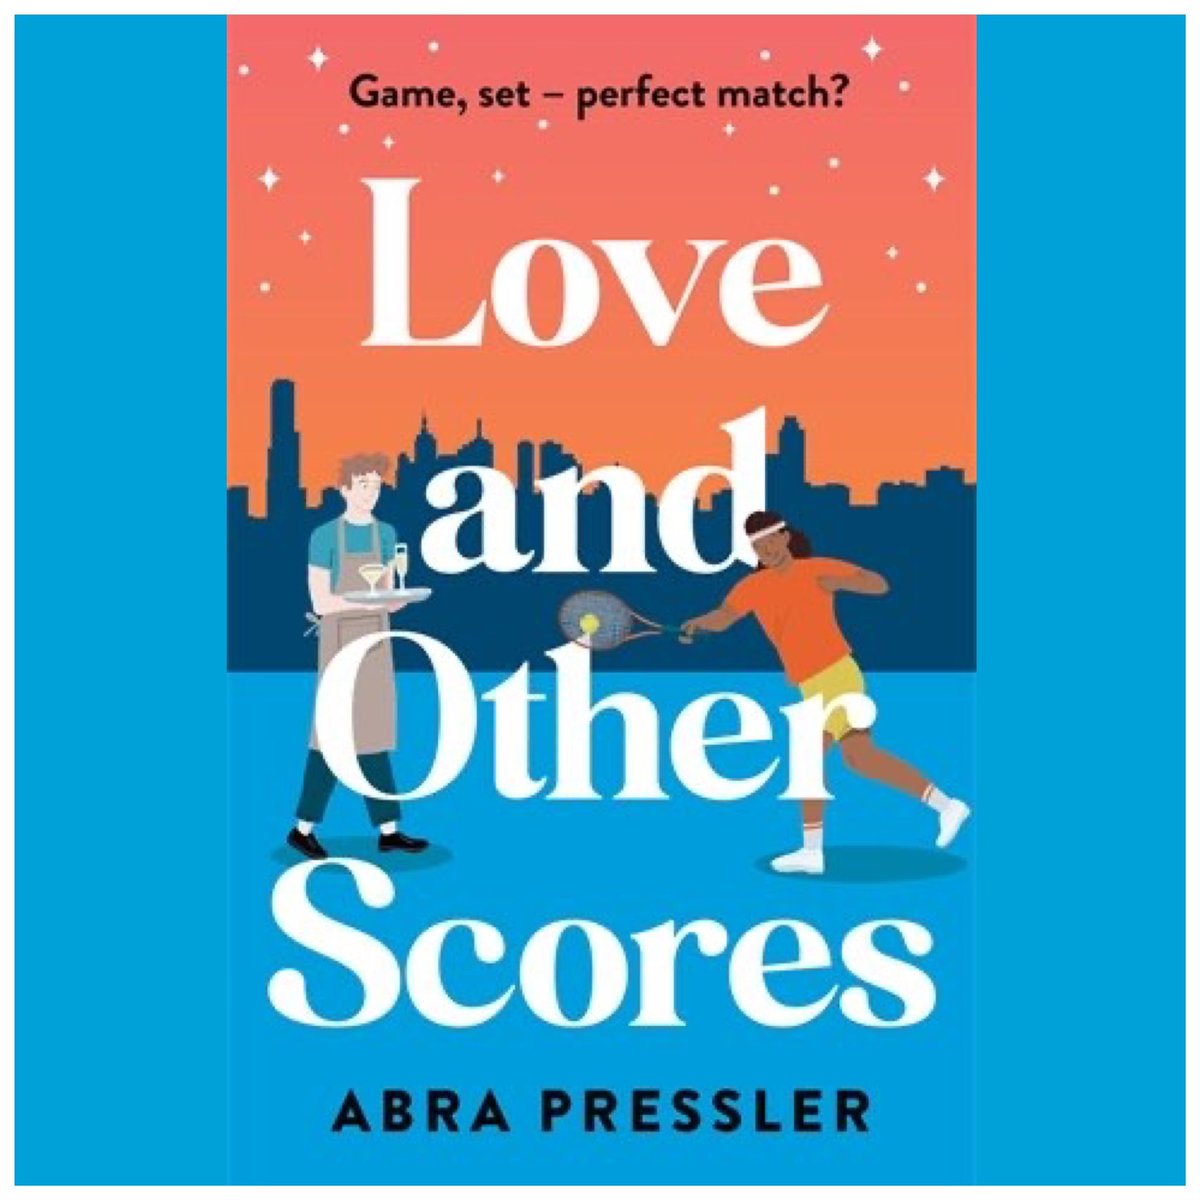 Game, set - perfect match?! Nick Wasiliev sits down with Abra Pressler, author of Love and Other Scores. They discuss the value of championing homegrown queer romance, what Abra would do if Rafael Nadal would appear in front of her, and more. LISTEN NOW: on.soundcloud.com/YTP48u7q1NEkPi…